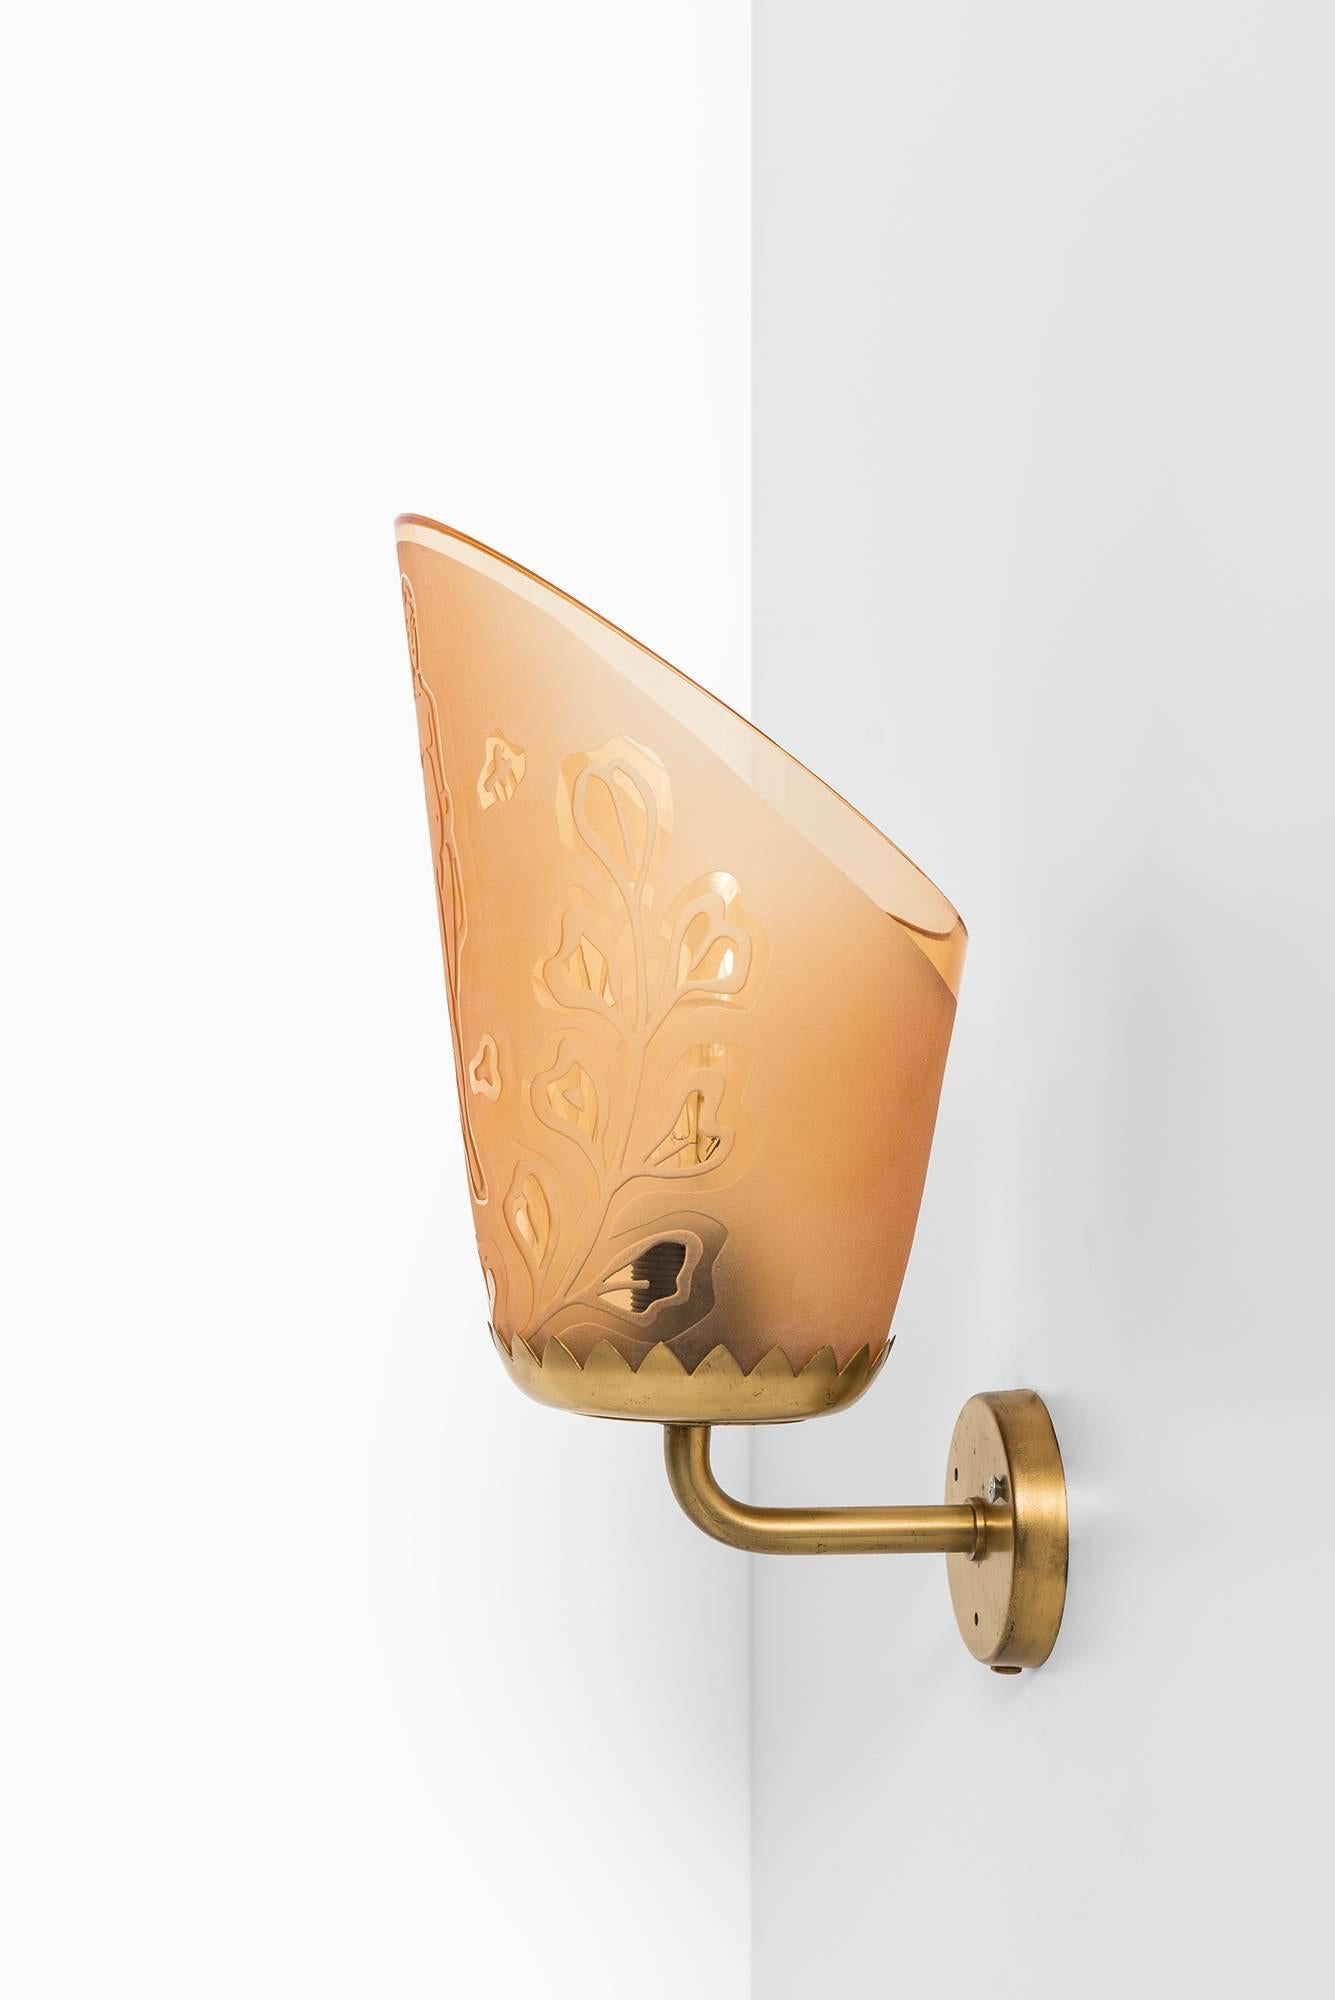 Rare pair of wall lamps in brass and etched glass designed by Bo Notini. Produced by Glössner in Sweden.